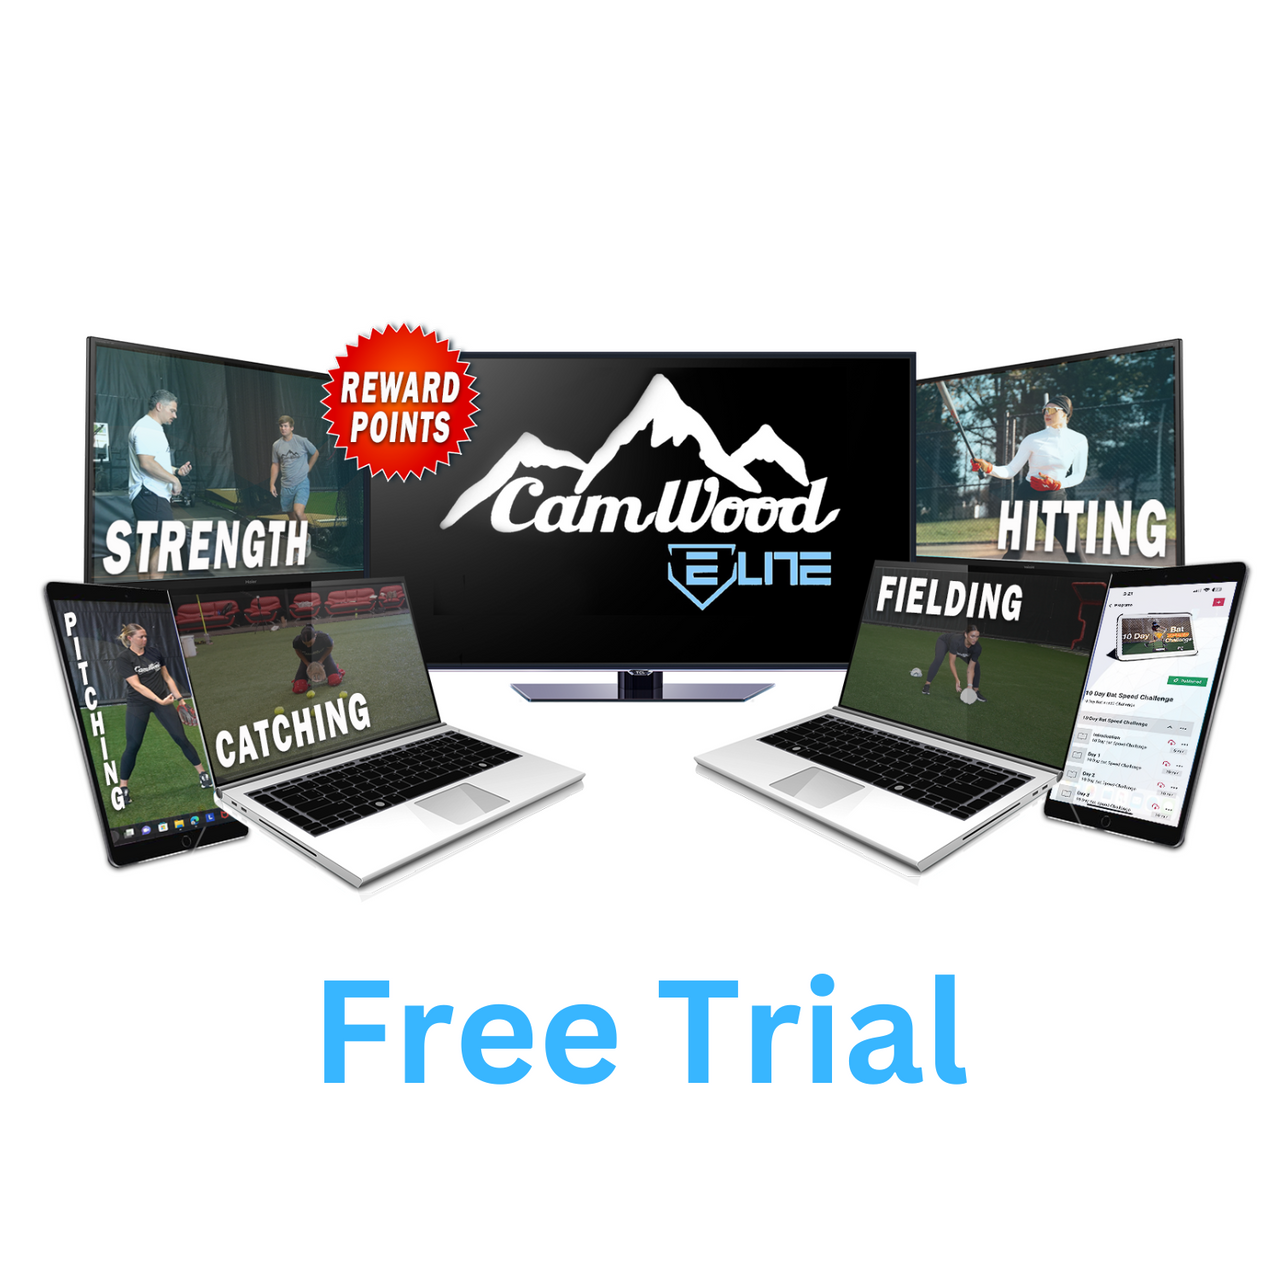 Softball CamWood Elite Subscription - FREE 21 Day Trial